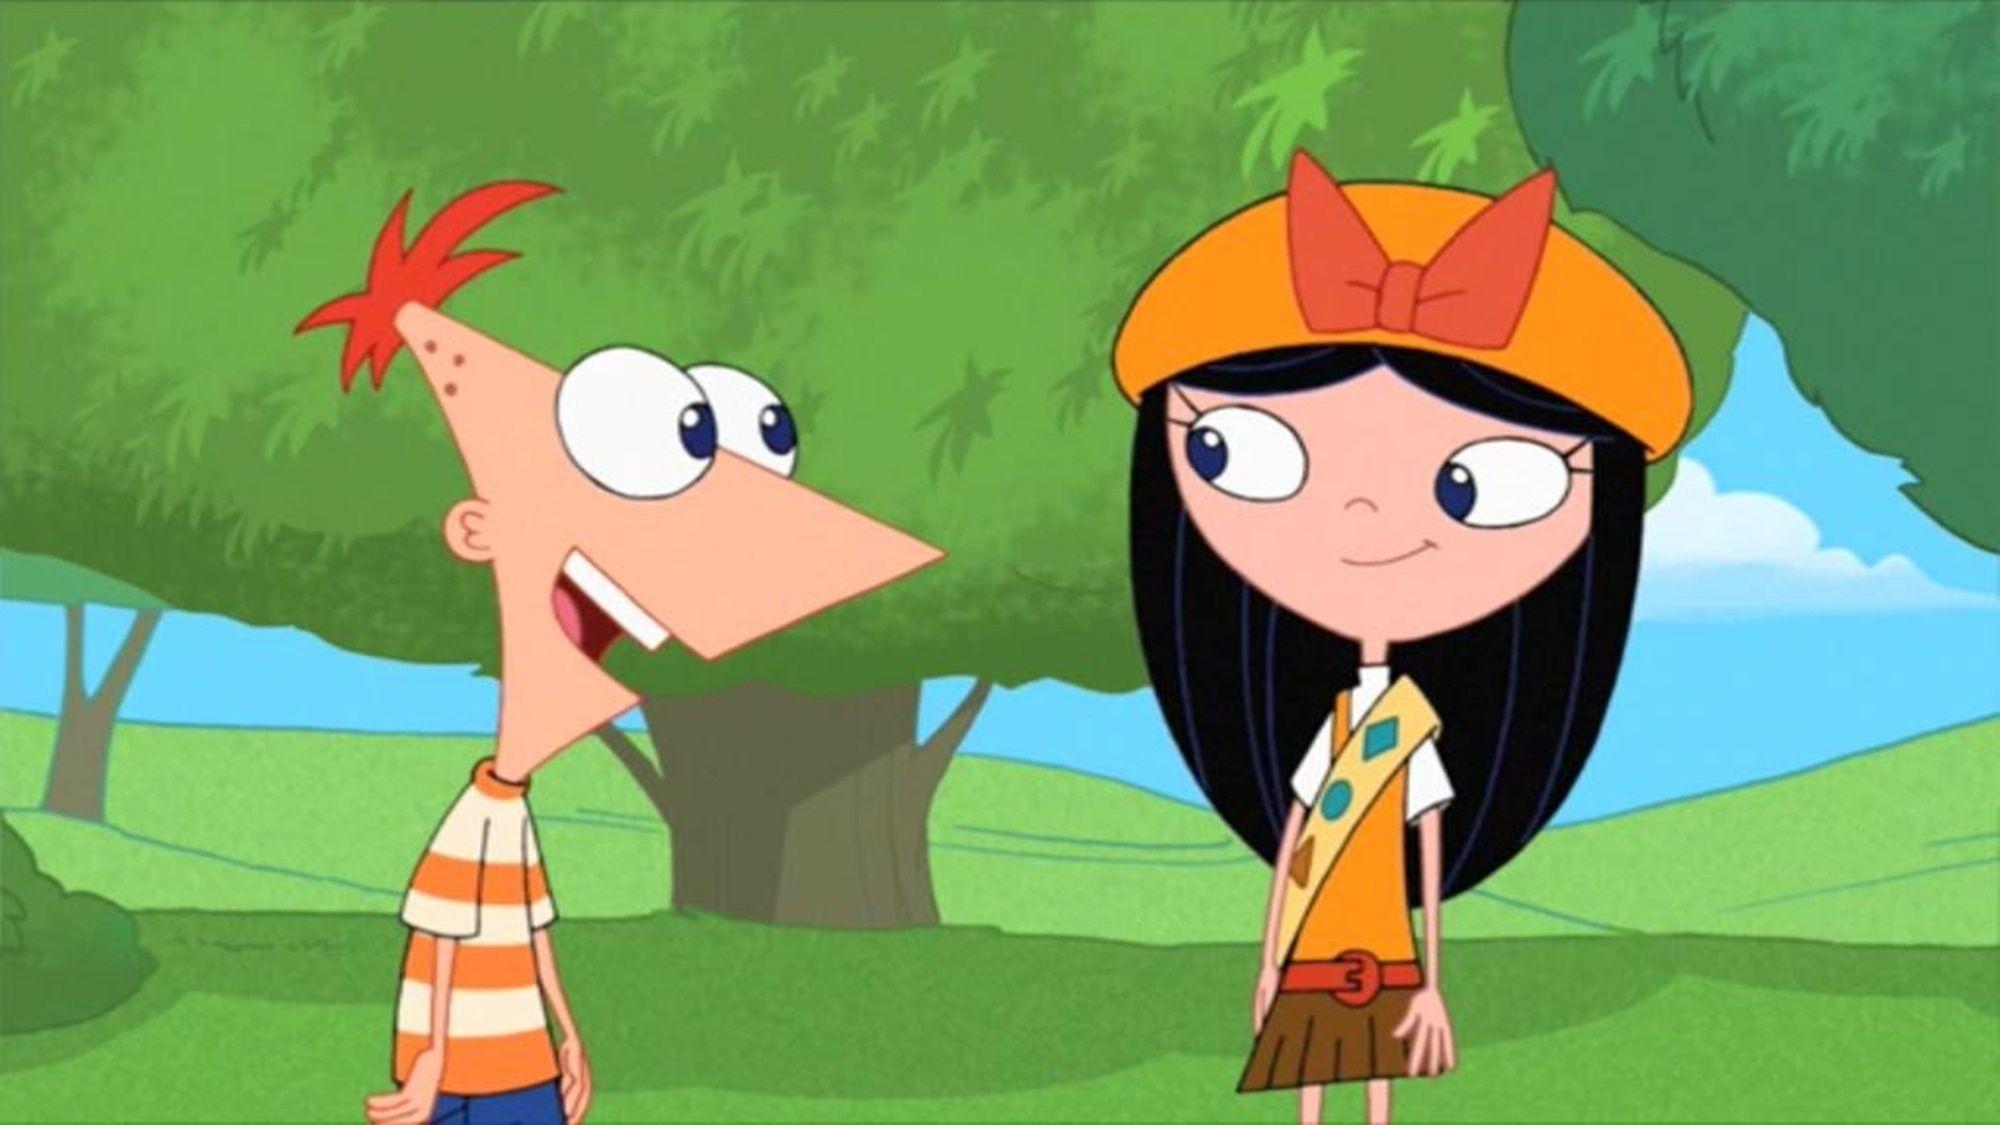 HD Phineas And Ferb Wallpaper and Photo. HD Cartoons Wallpaper